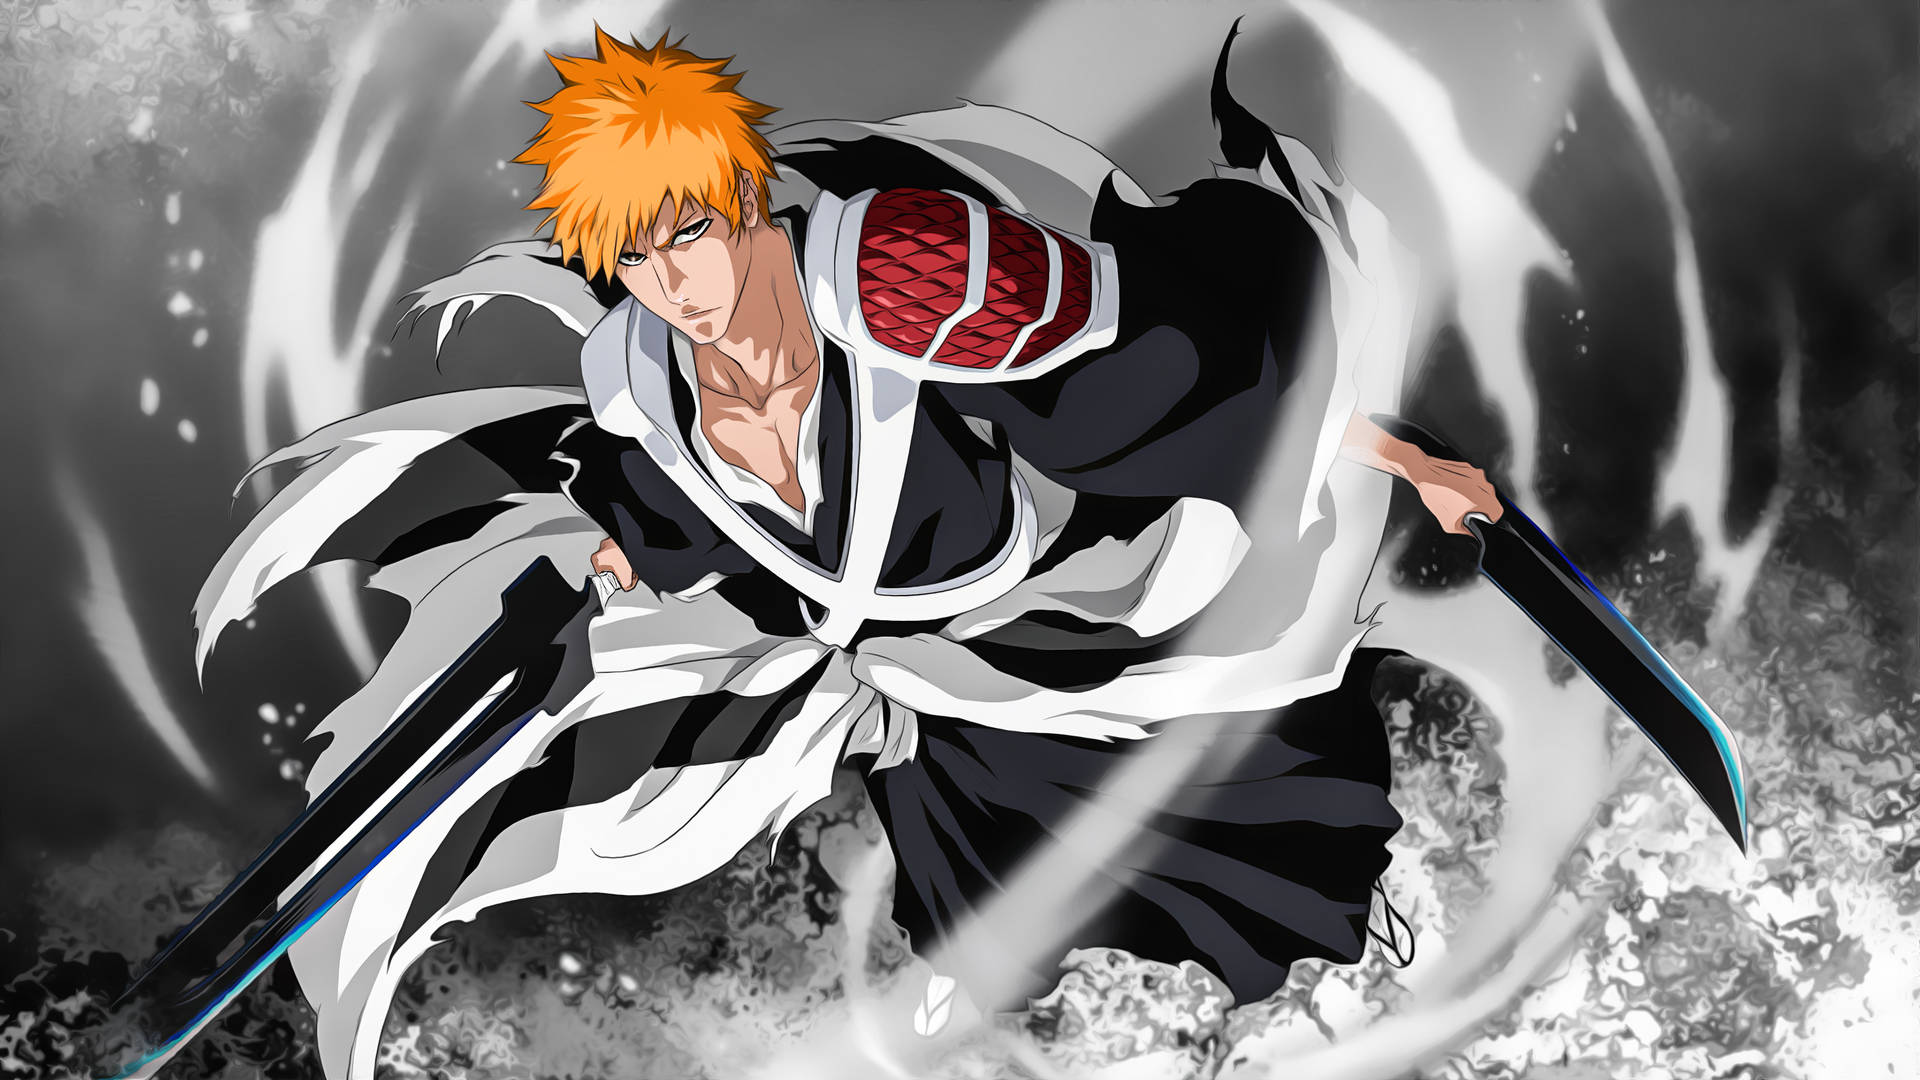 200+] Bleach Anime Pictures